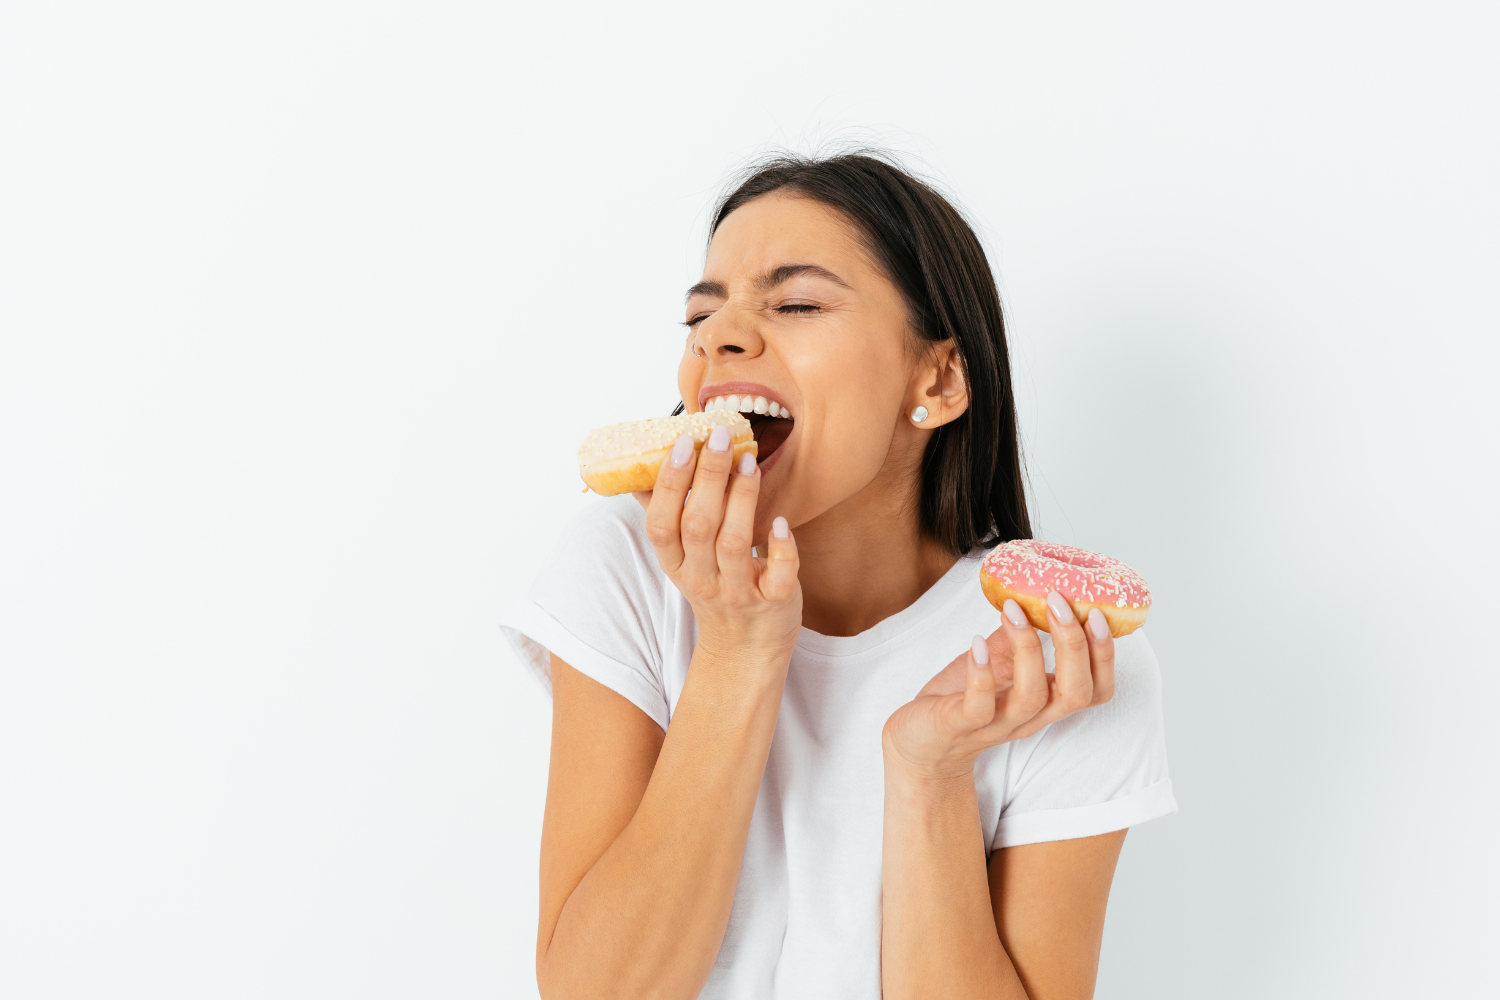 5 strategies to stop overeating